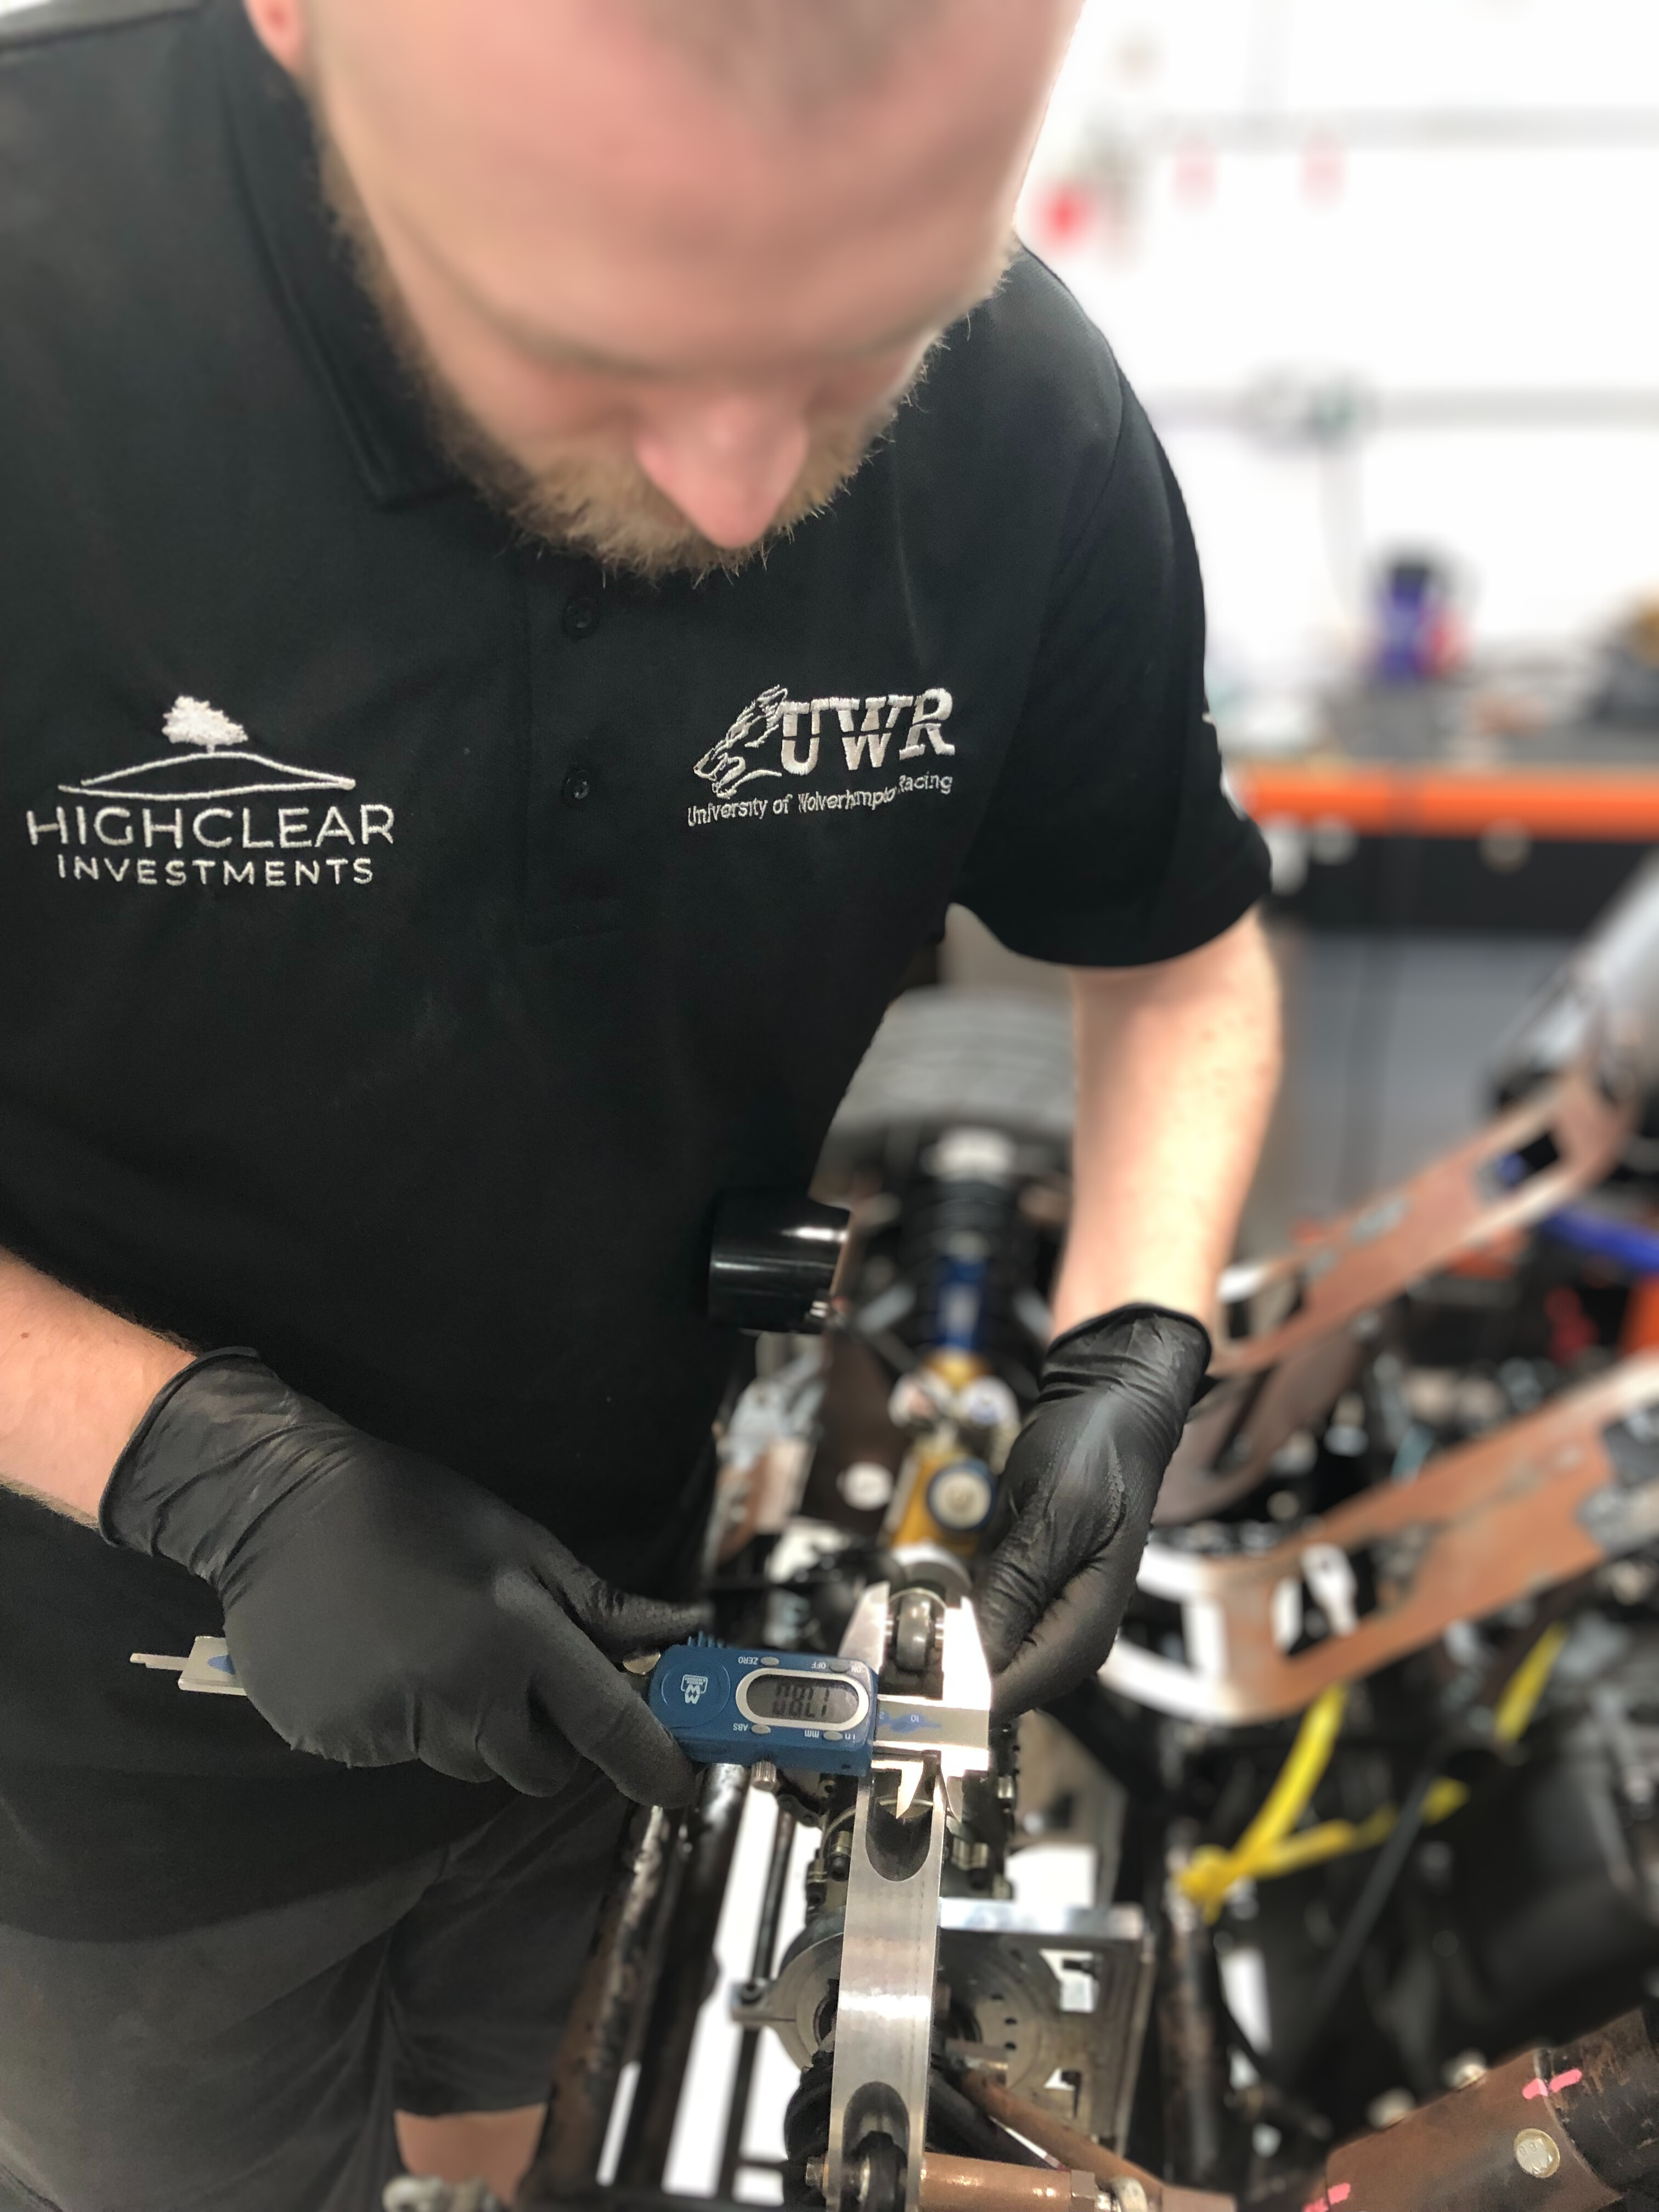 Moore & Wright Fuel the University of Wolverhampton Racing Team in Formula Student Competition